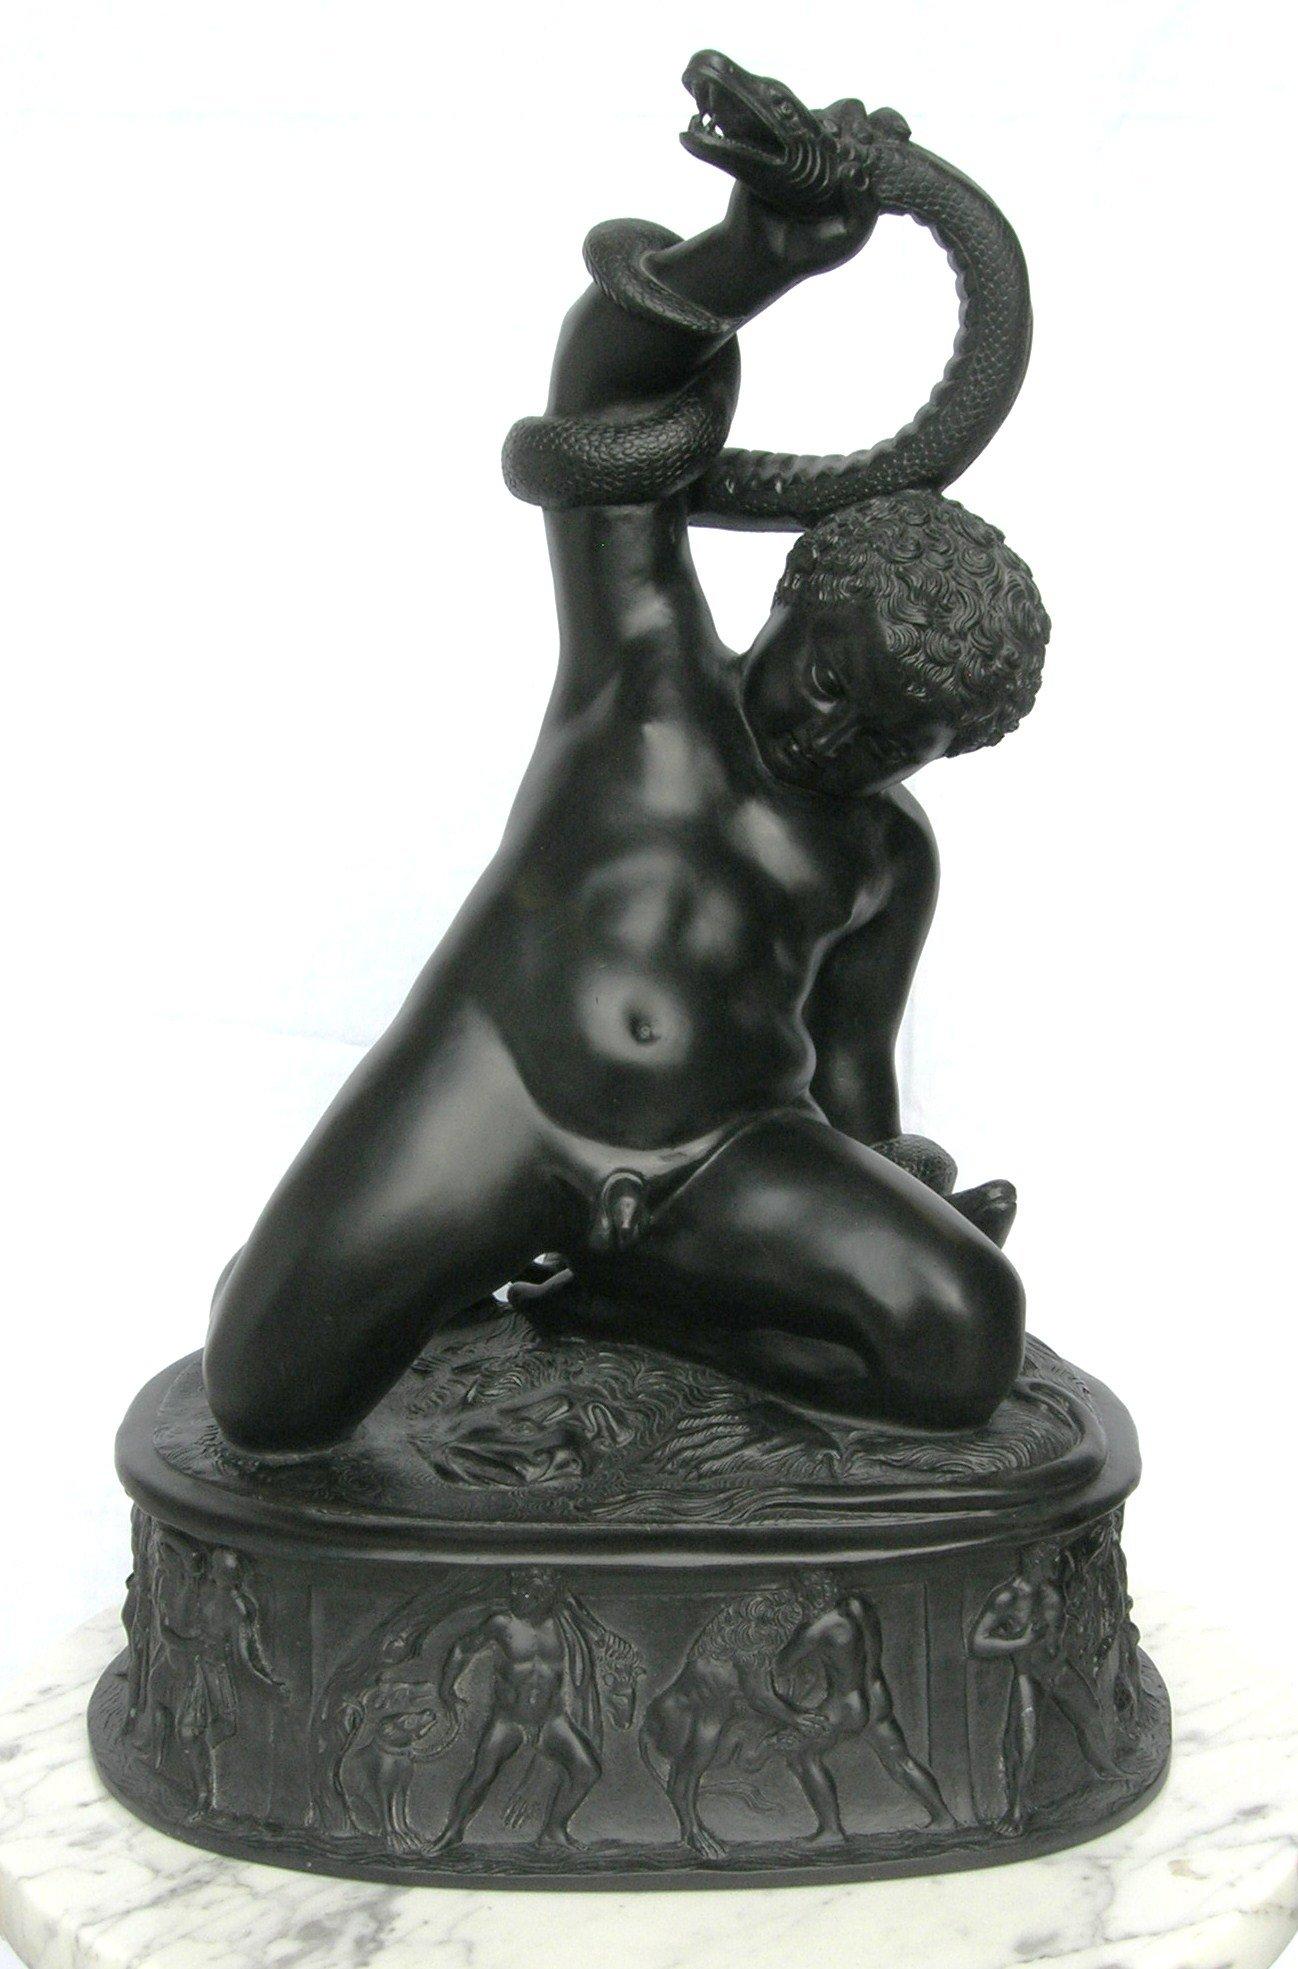 A stunning young Hercules, Basalt black marble sculpture, 20th century.
The Young Hercules, after Thorvaldsen, in Basalt black
Hercule”s mother Alcmena, was visited one night by Zeus, he came to warn her of his wife's plot. 

Zeus wife Hera was